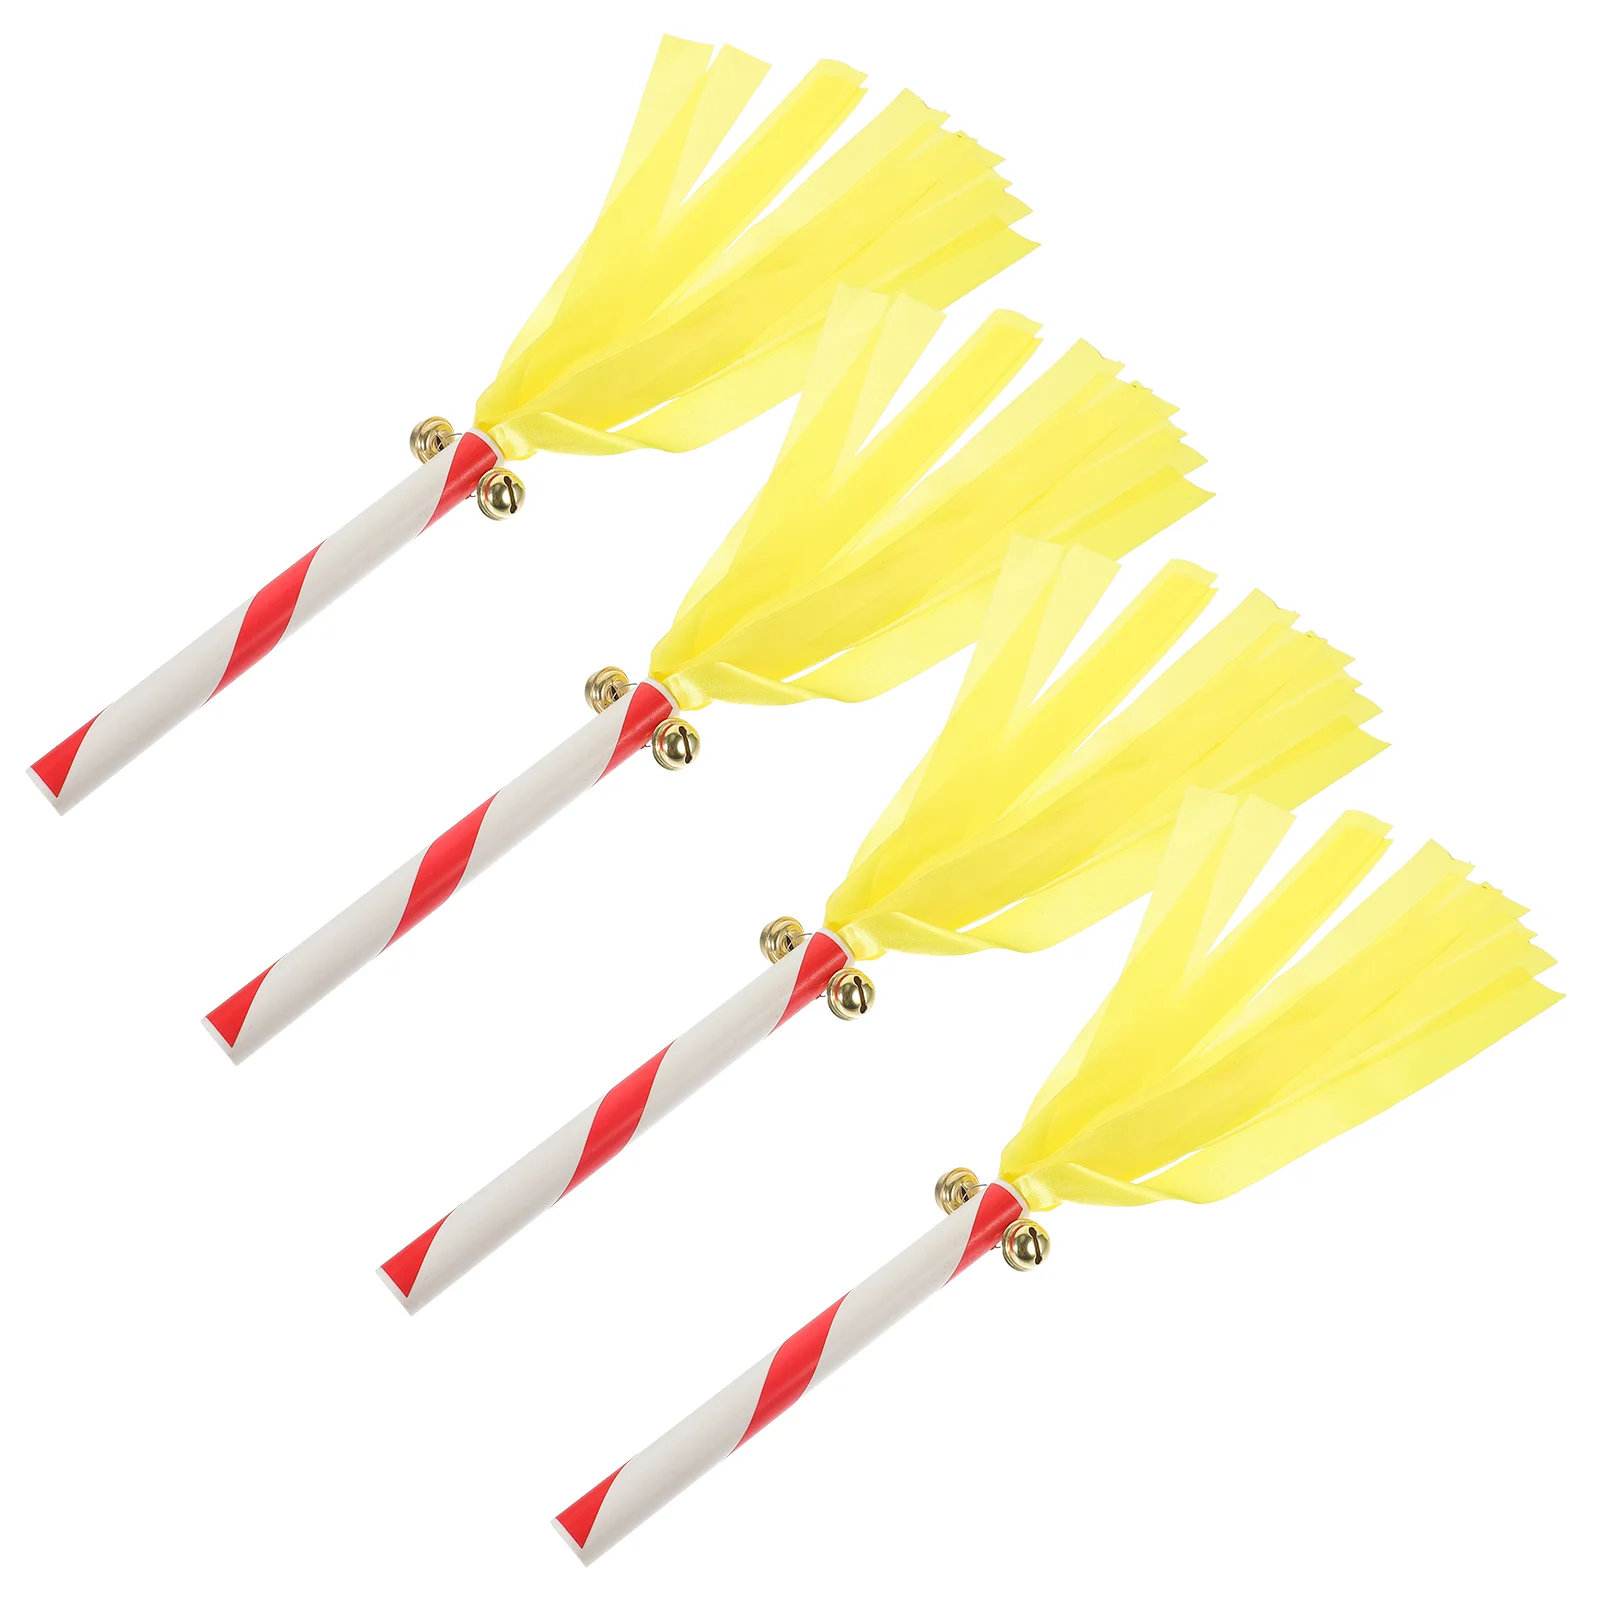 4Pcs Party Favors Cheer Leading Favors Thunder Sticks Thunder Stick Props Cheerleading Pompom